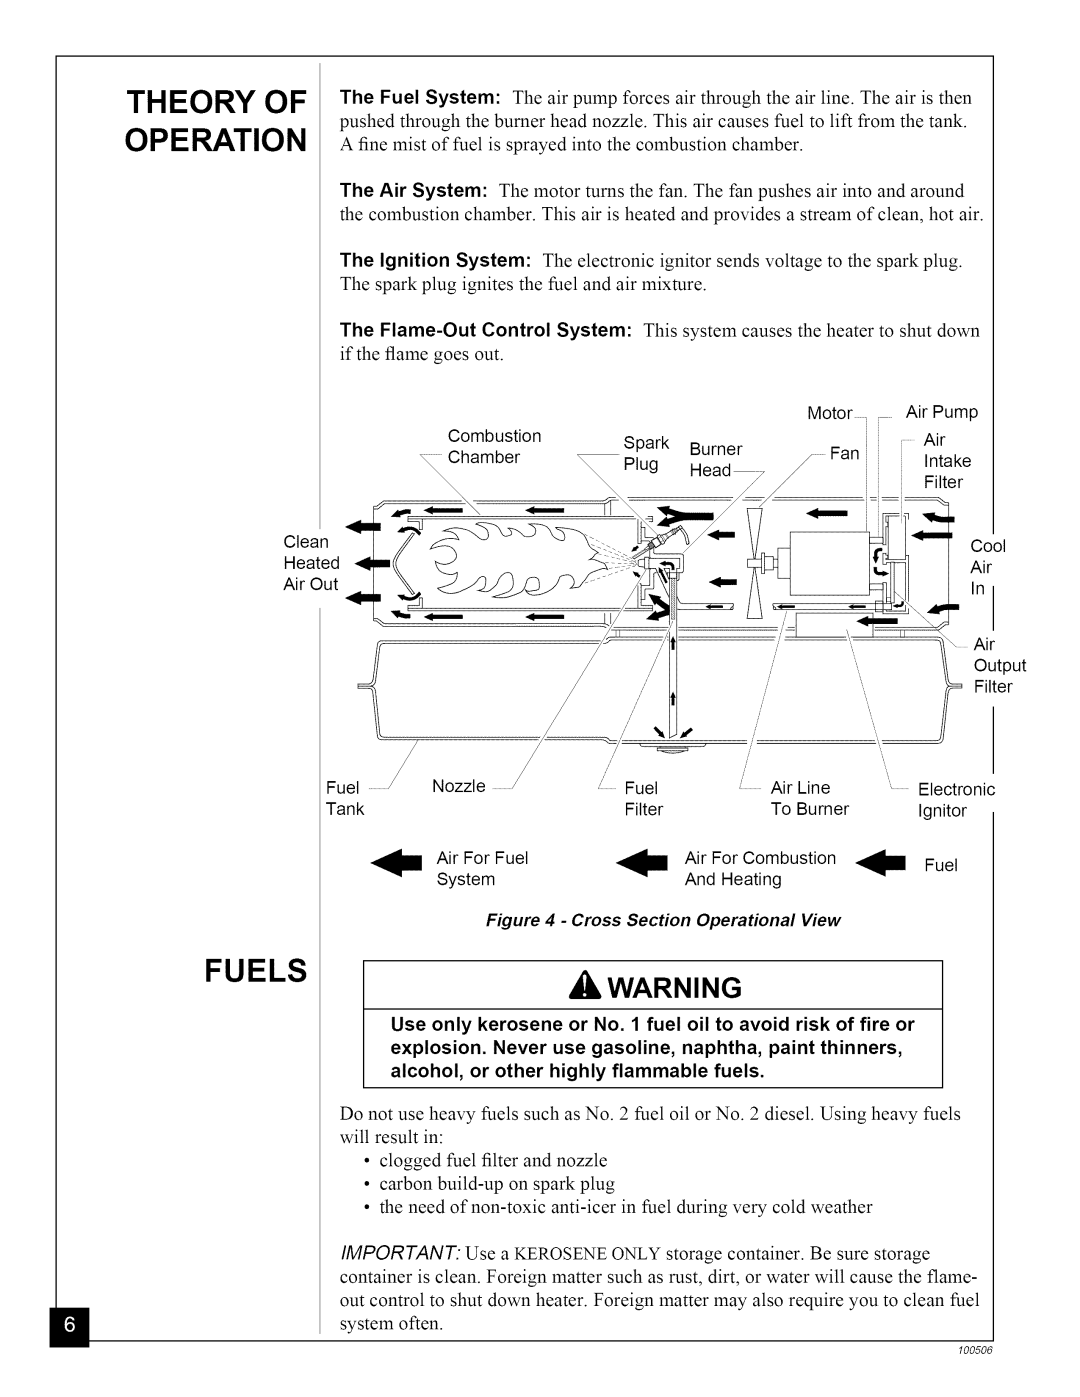 Sears 583.35683, 583.35682 Theory Of Operation, Fuels, clogged fuel filter and nozzle carbon build-up on spark plug 